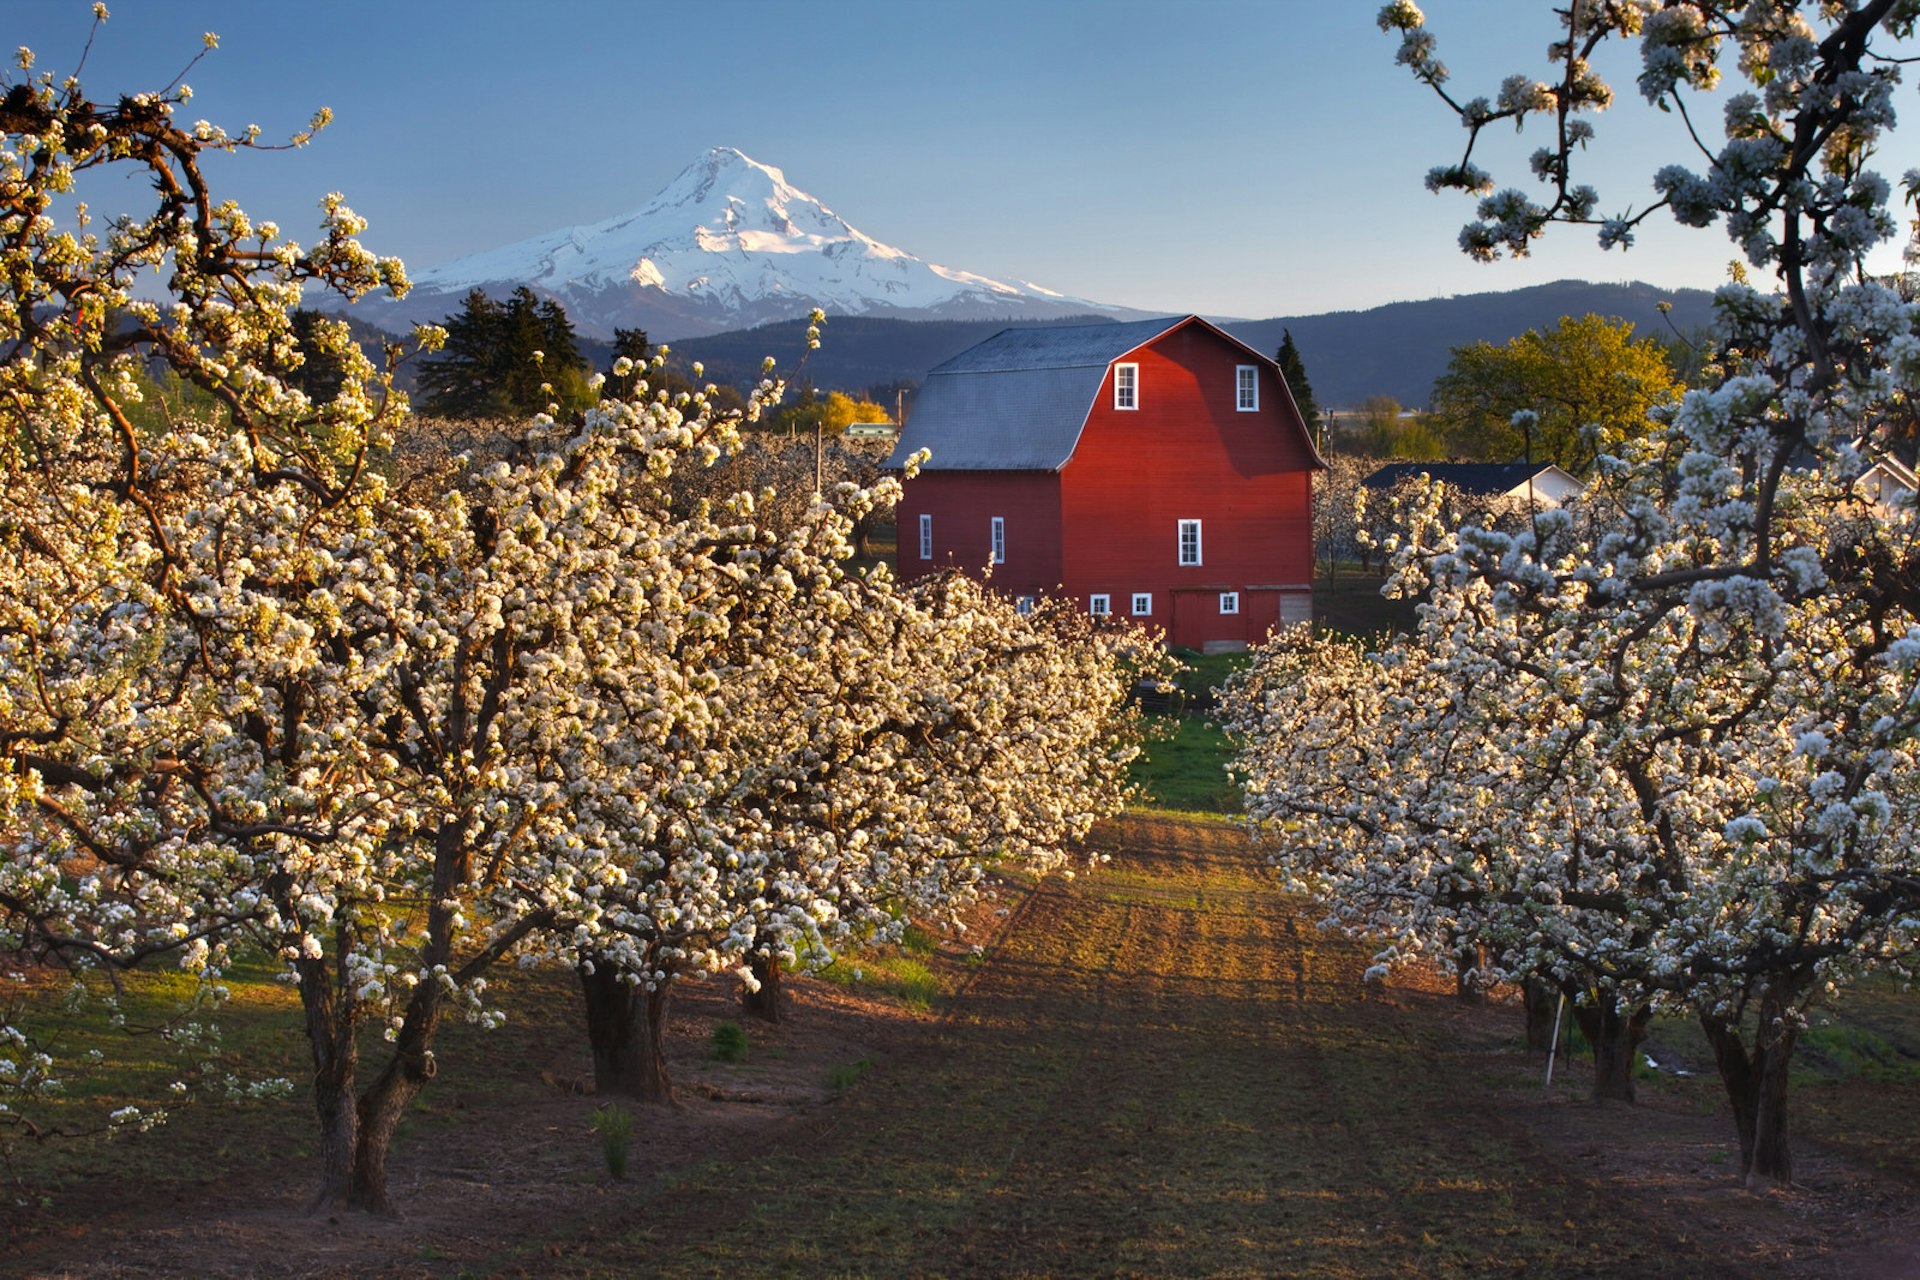 View of barn and mount hood from apple orchard © Getty Images